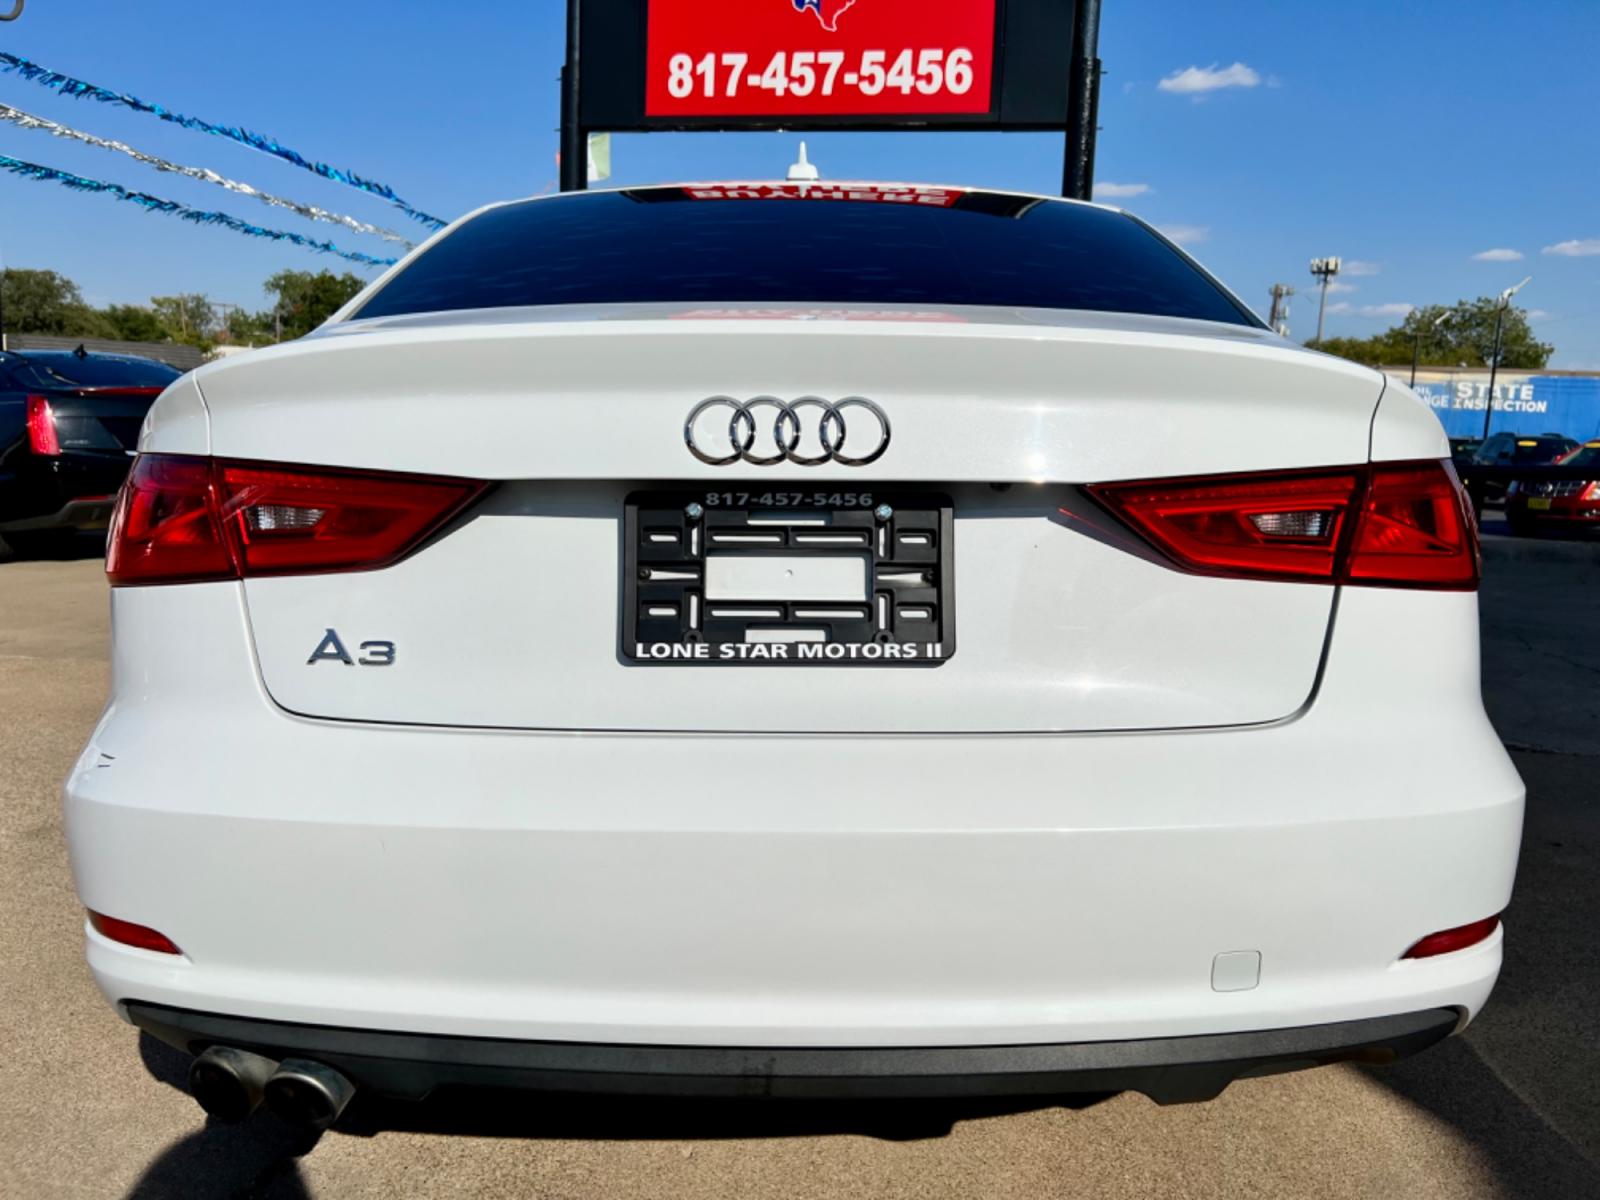 2015 WHITE AUDI A3 PREMIUM (WAUACGFF9F1) , located at 5900 E. Lancaster Ave., Fort Worth, TX, 76112, (817) 457-5456, 0.000000, 0.000000 - This is a 2015 AUDI A3 PREMIUM 4 DOOR SEDAN that is in excellent condition. There are no dents or scratches. The interior is clean with no rips or tears or stains. All power windows, door locks and seats. Ice cold AC for those hot Texas summer days. It is equipped with a CD player, AM/FM radio, AUX - Photo #5